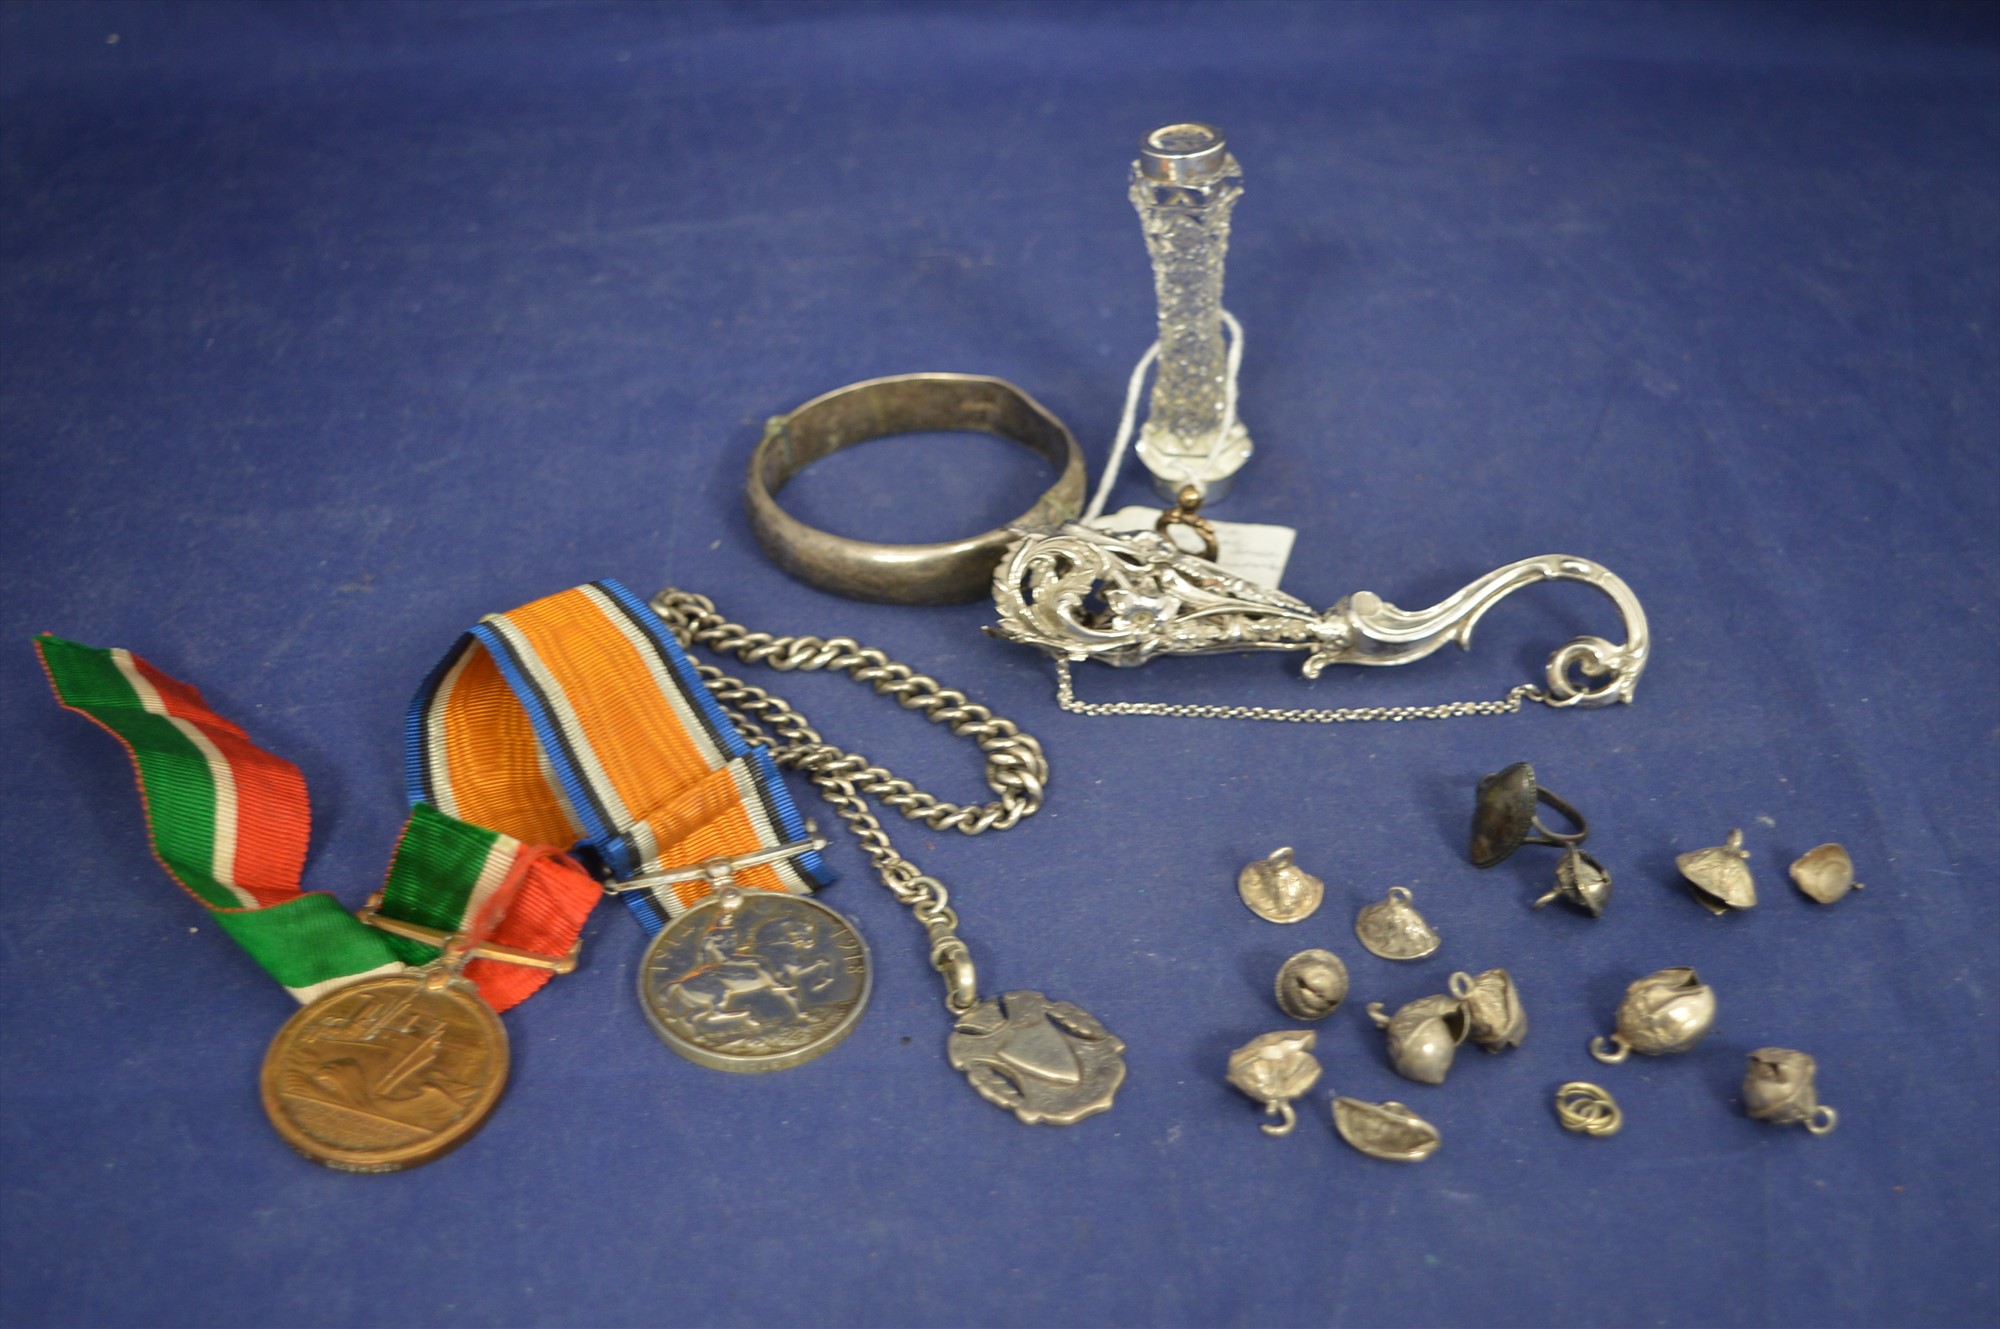 Objects of vertu and medals